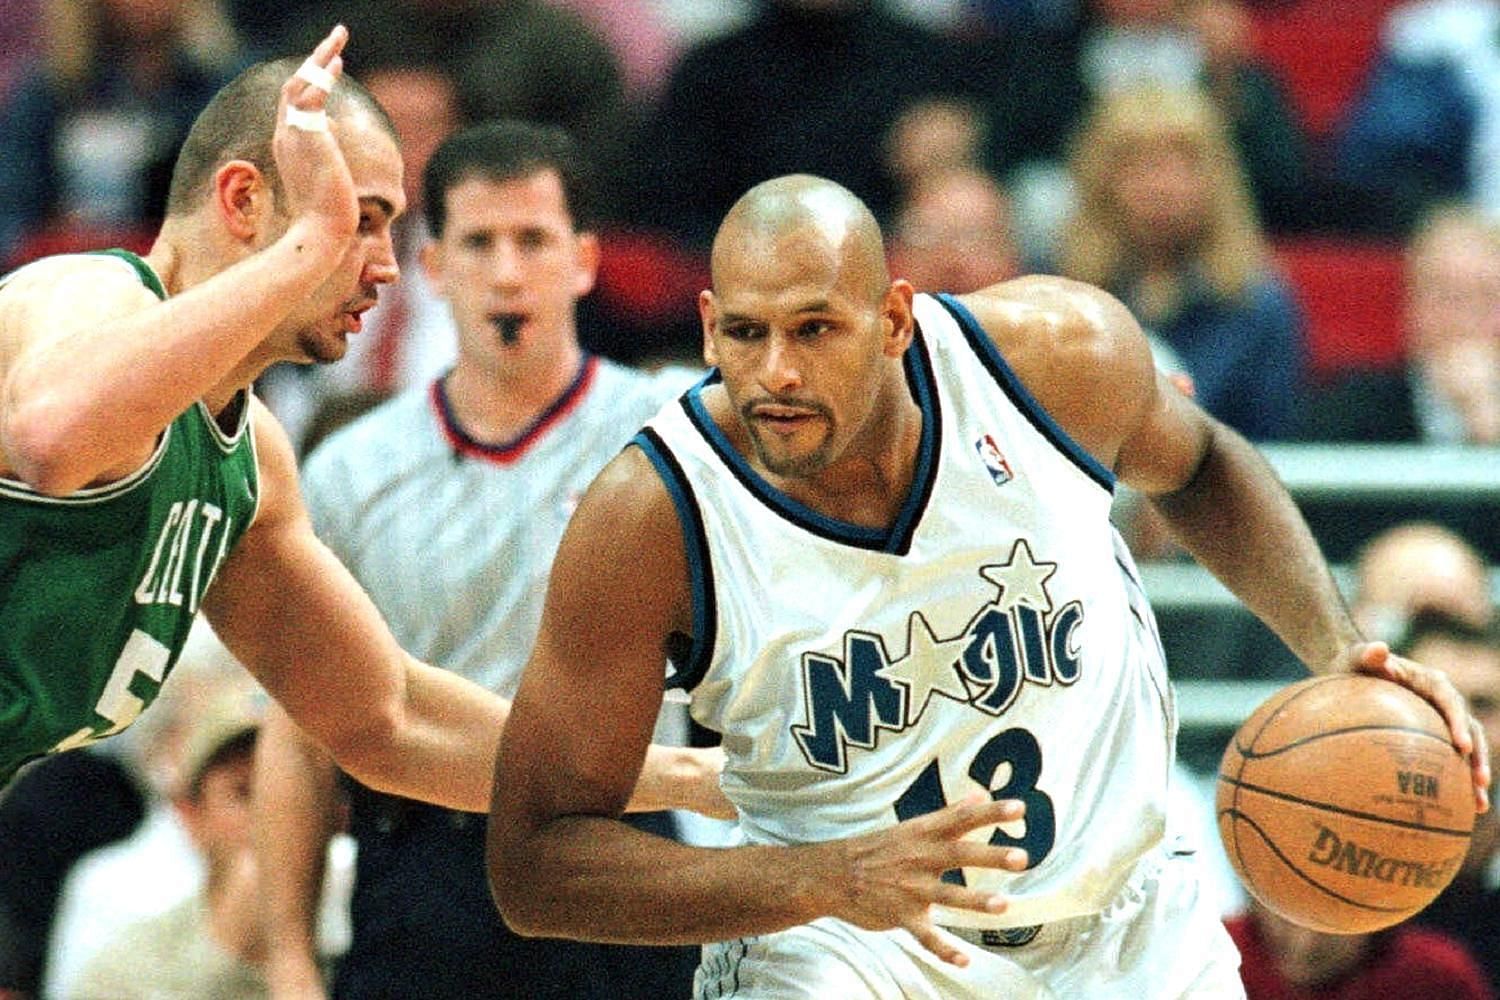 John Amaechi played a few seasons in the NBA and admitted he was gay four years after retirement. [photo: The Times]